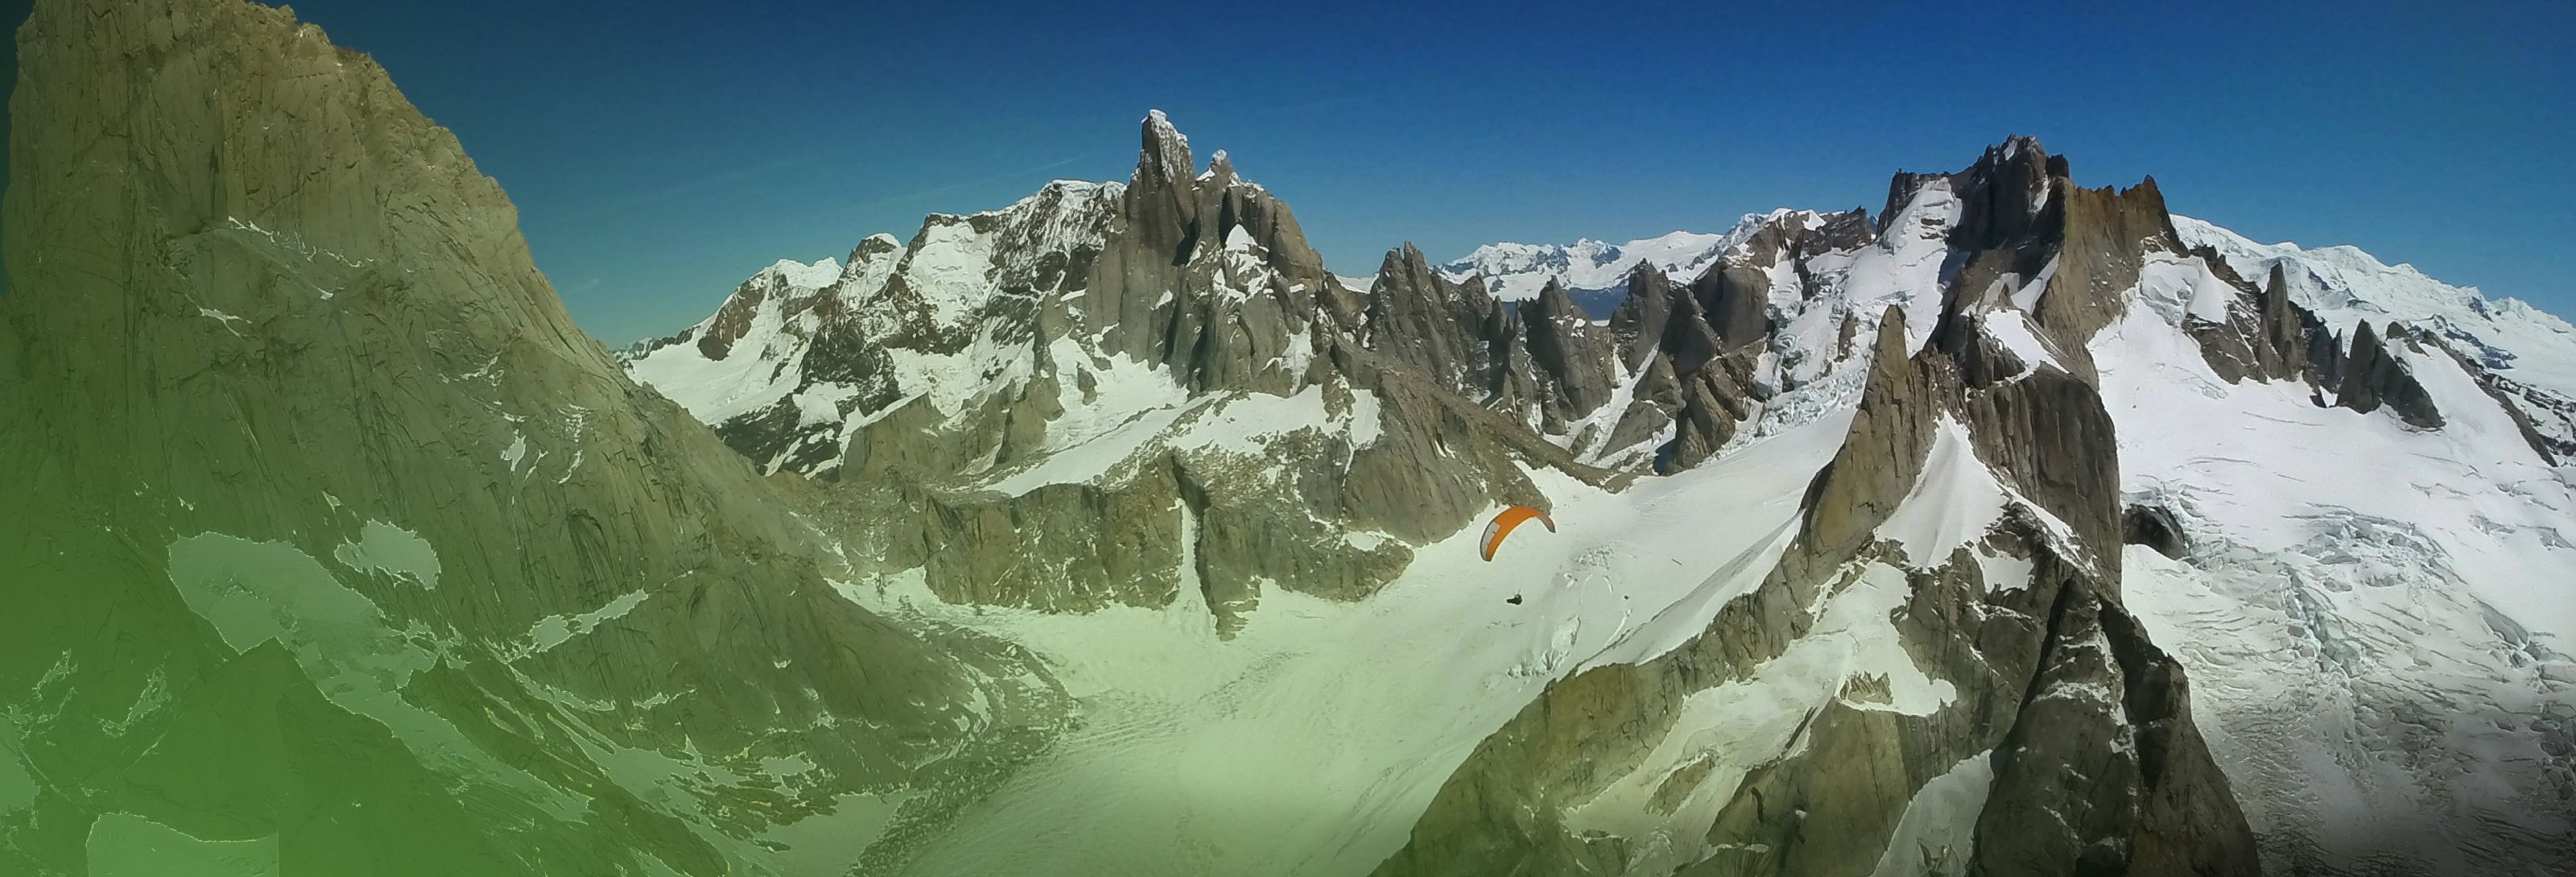 The Artik 5 makes the first ever paraglider traverse of Mount Fitz Roy